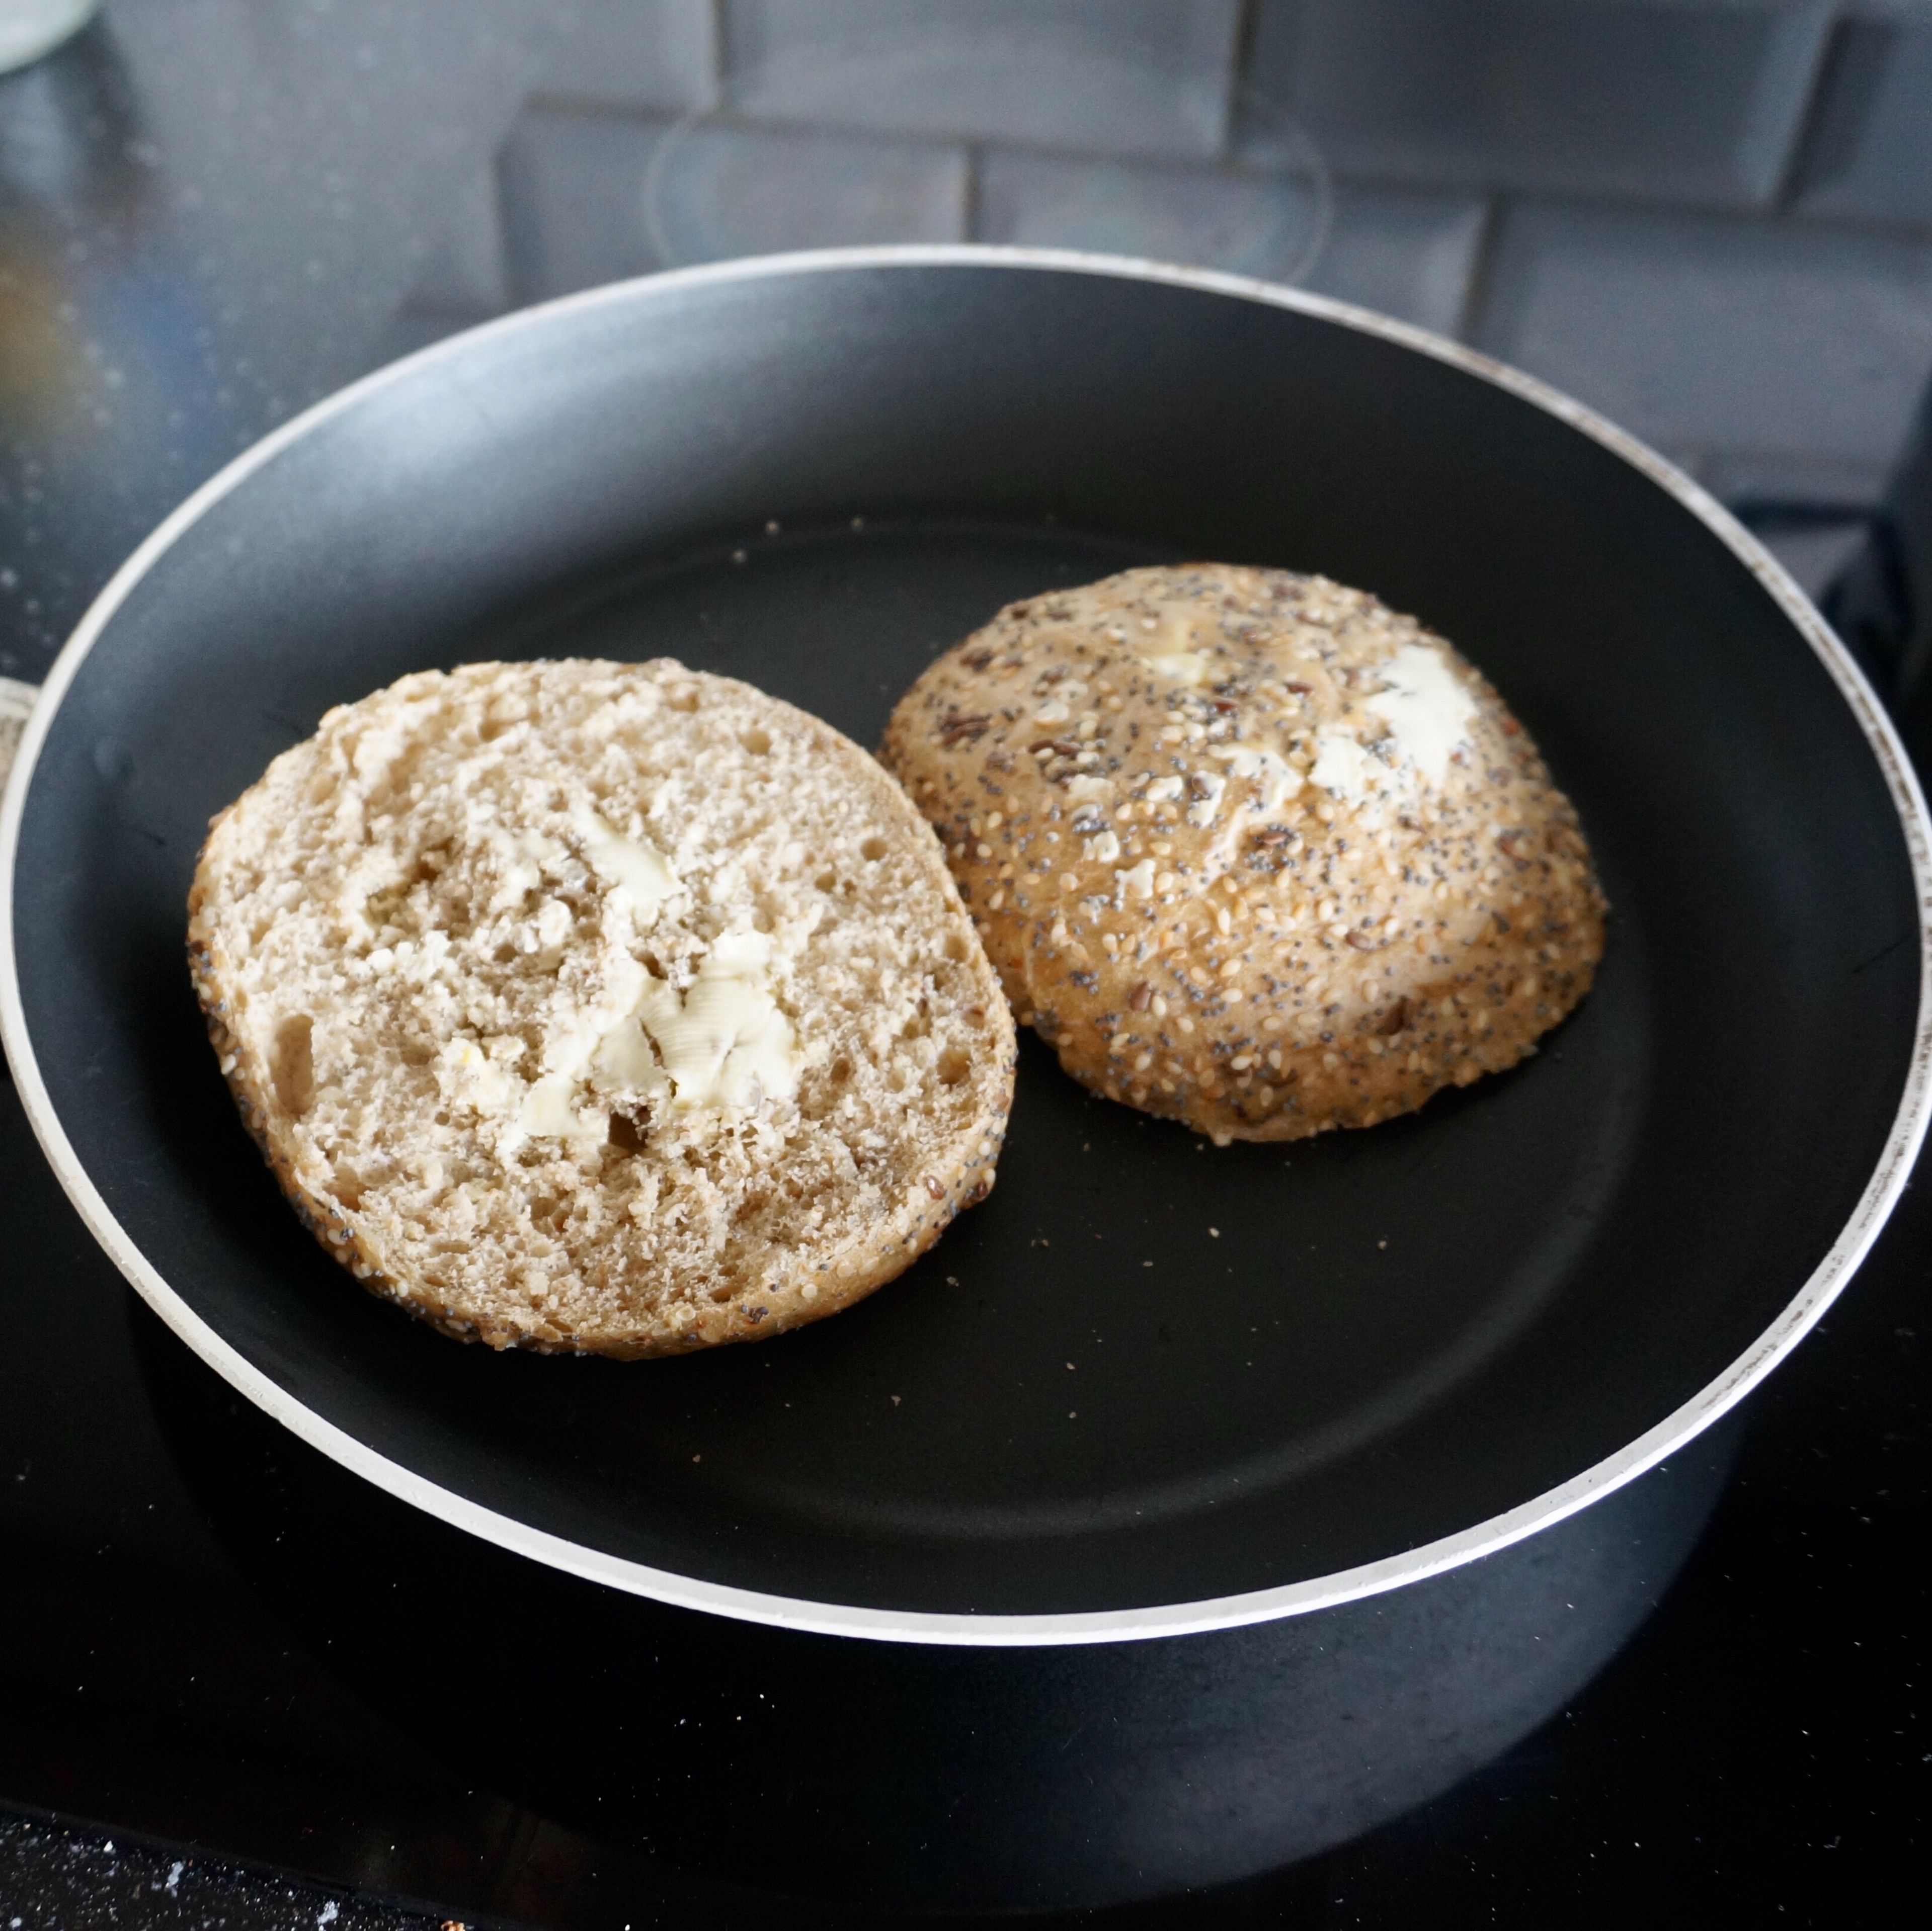 Cut the wheat bun, spread bread with butter on both sides and fry in a preheated pan.